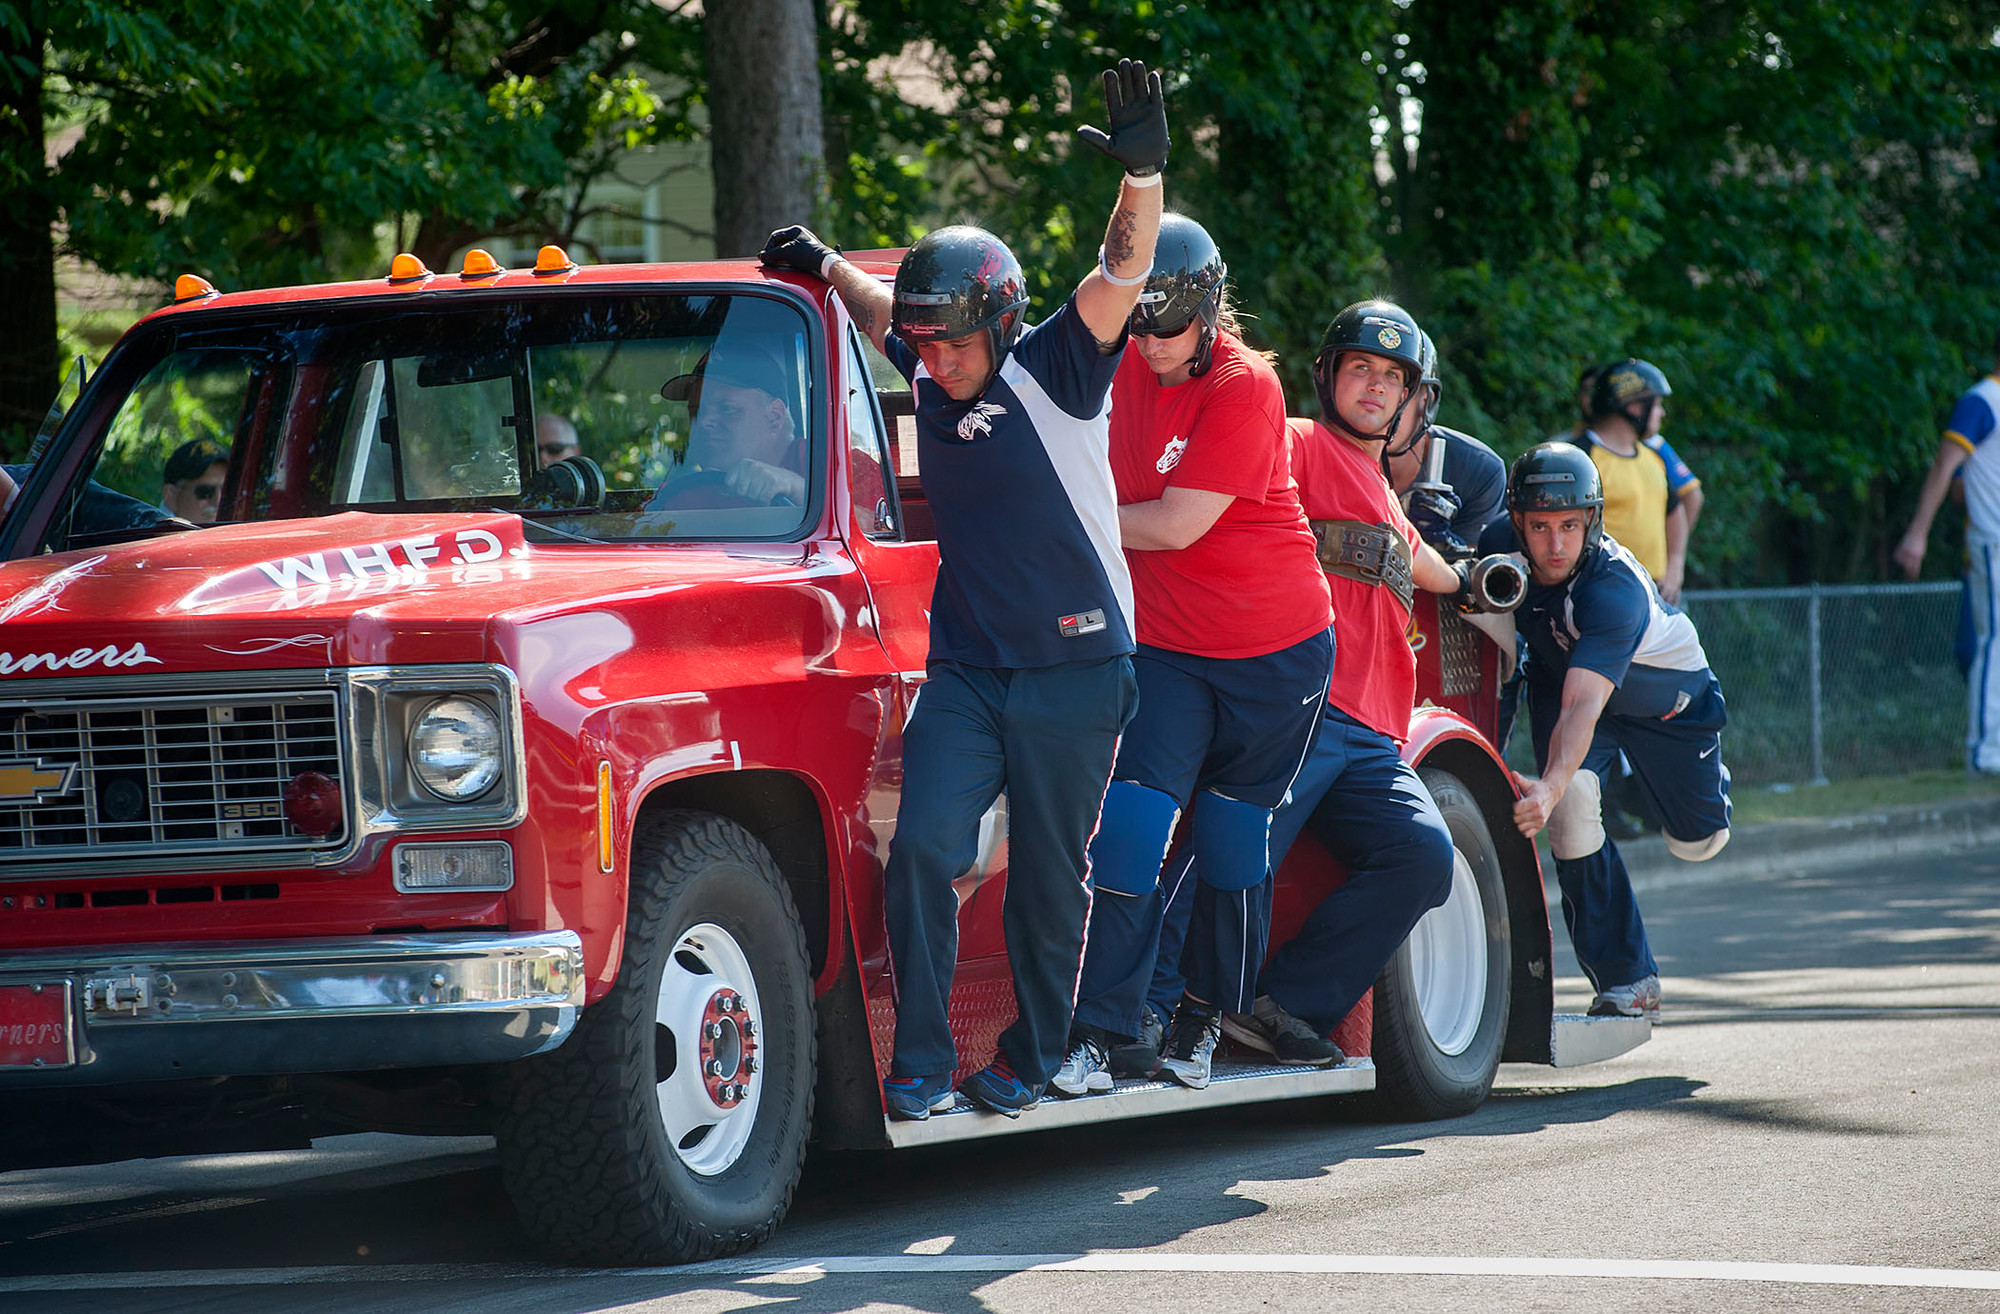 The 2015 Nassau County Combination Ol-Fashioned and Motorized Drill at Rockville Center on Saturday, July 25th, 2015